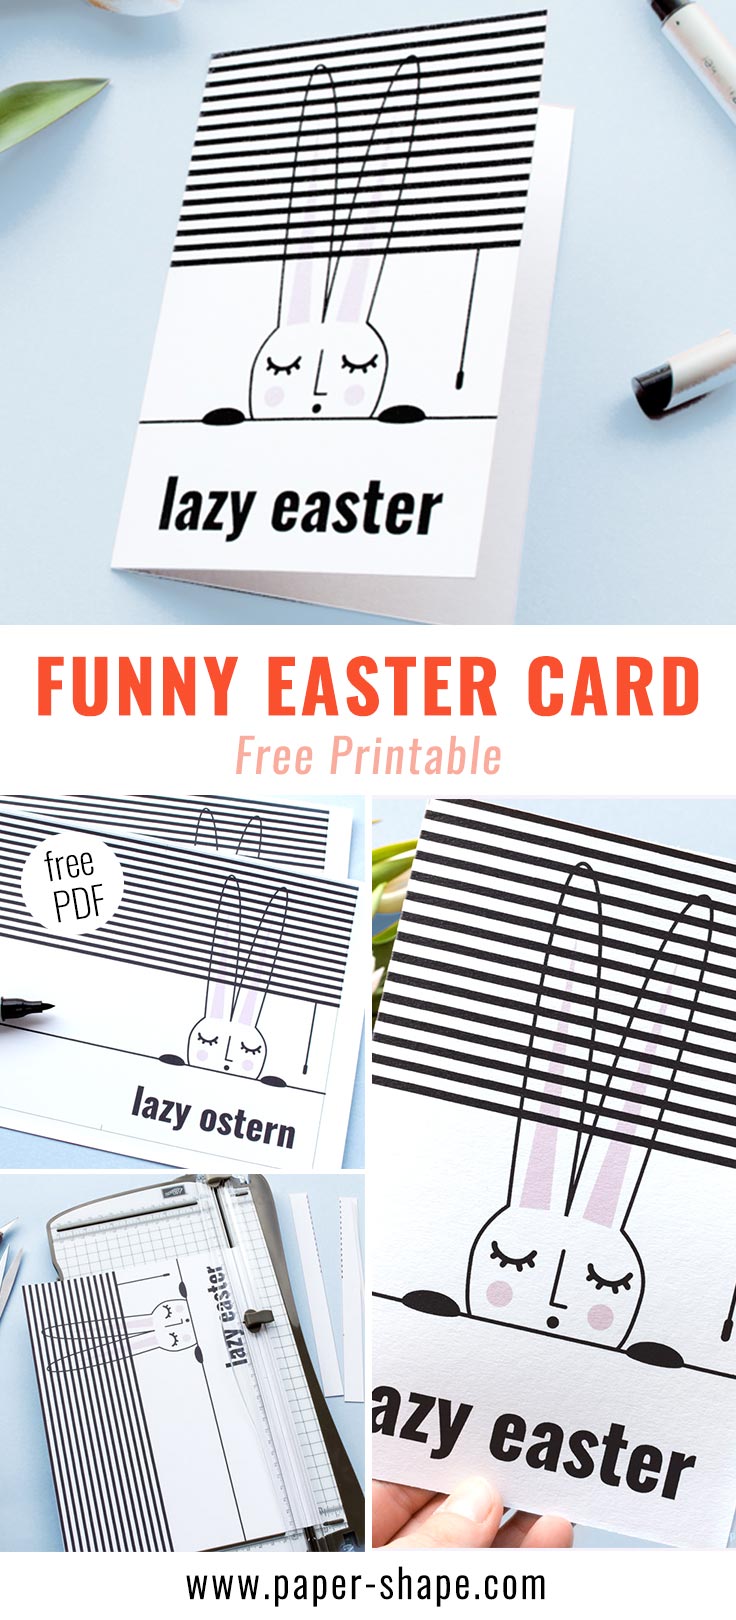 Handmade funny Easter card with free template./ PaperShape #eastergreetingcards #easter #papercraft #diy #papershape